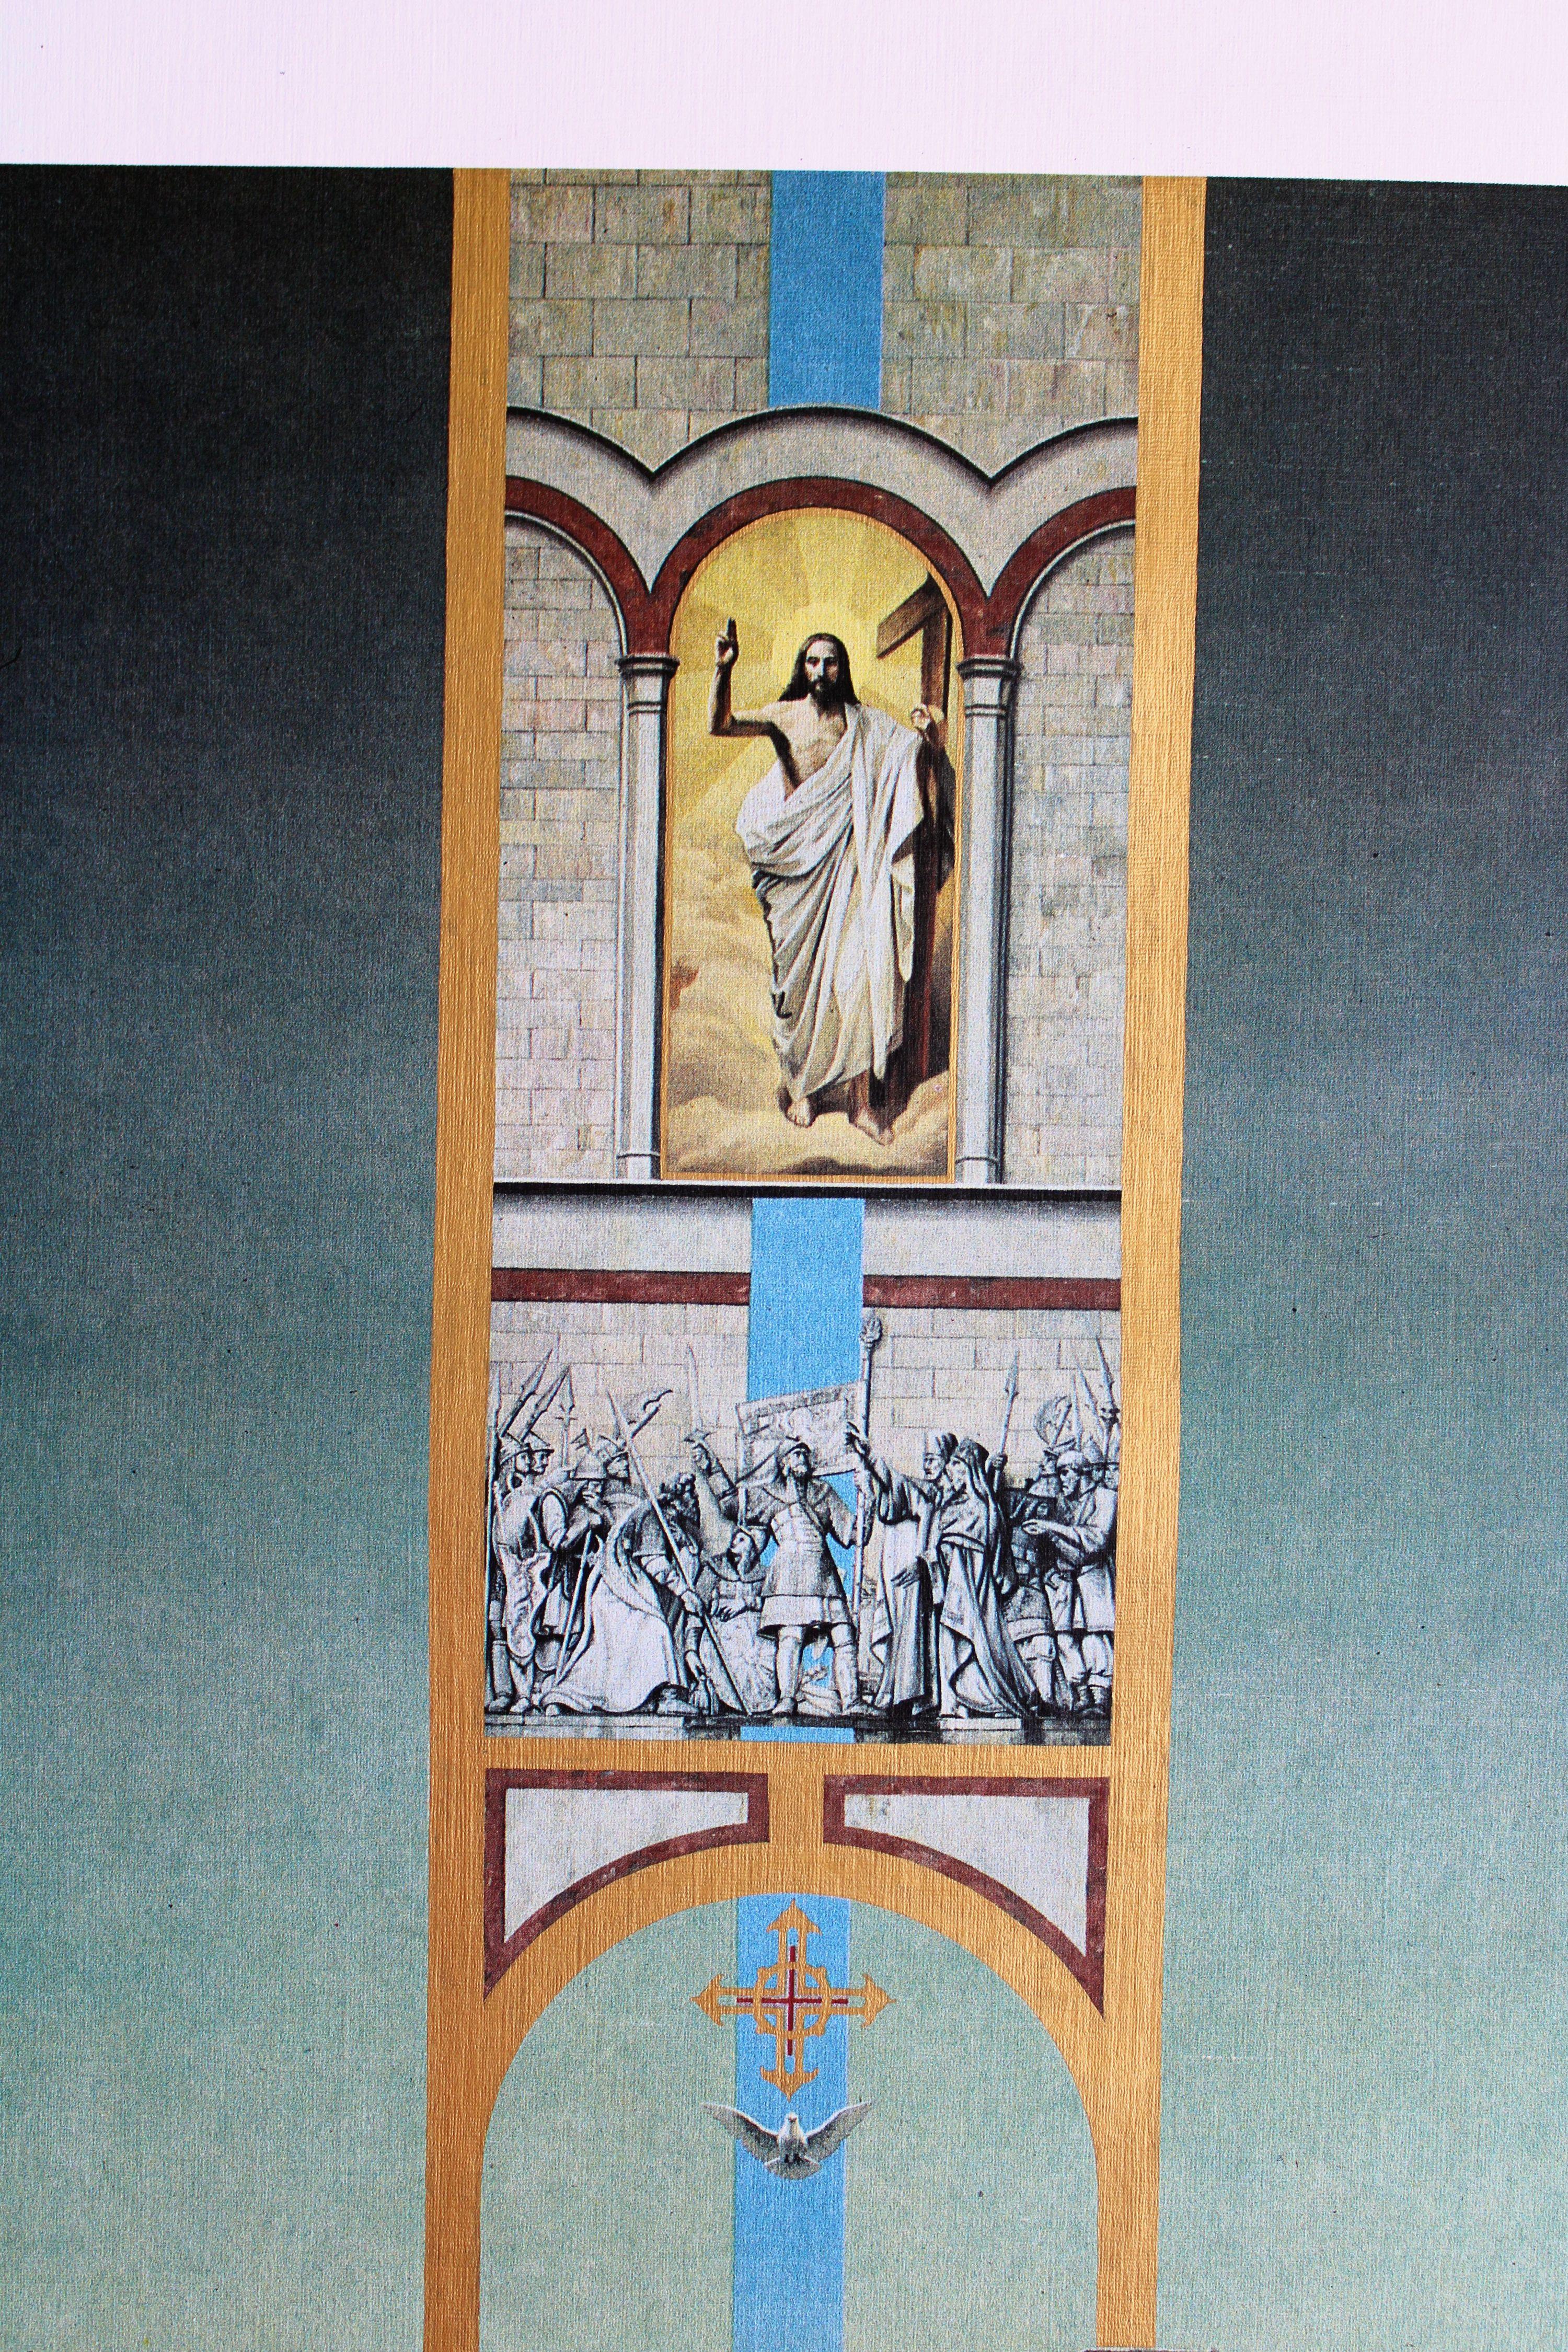 Cathedral of Christ the Savior. 1989, paper, screen print, 60x32.5 cm